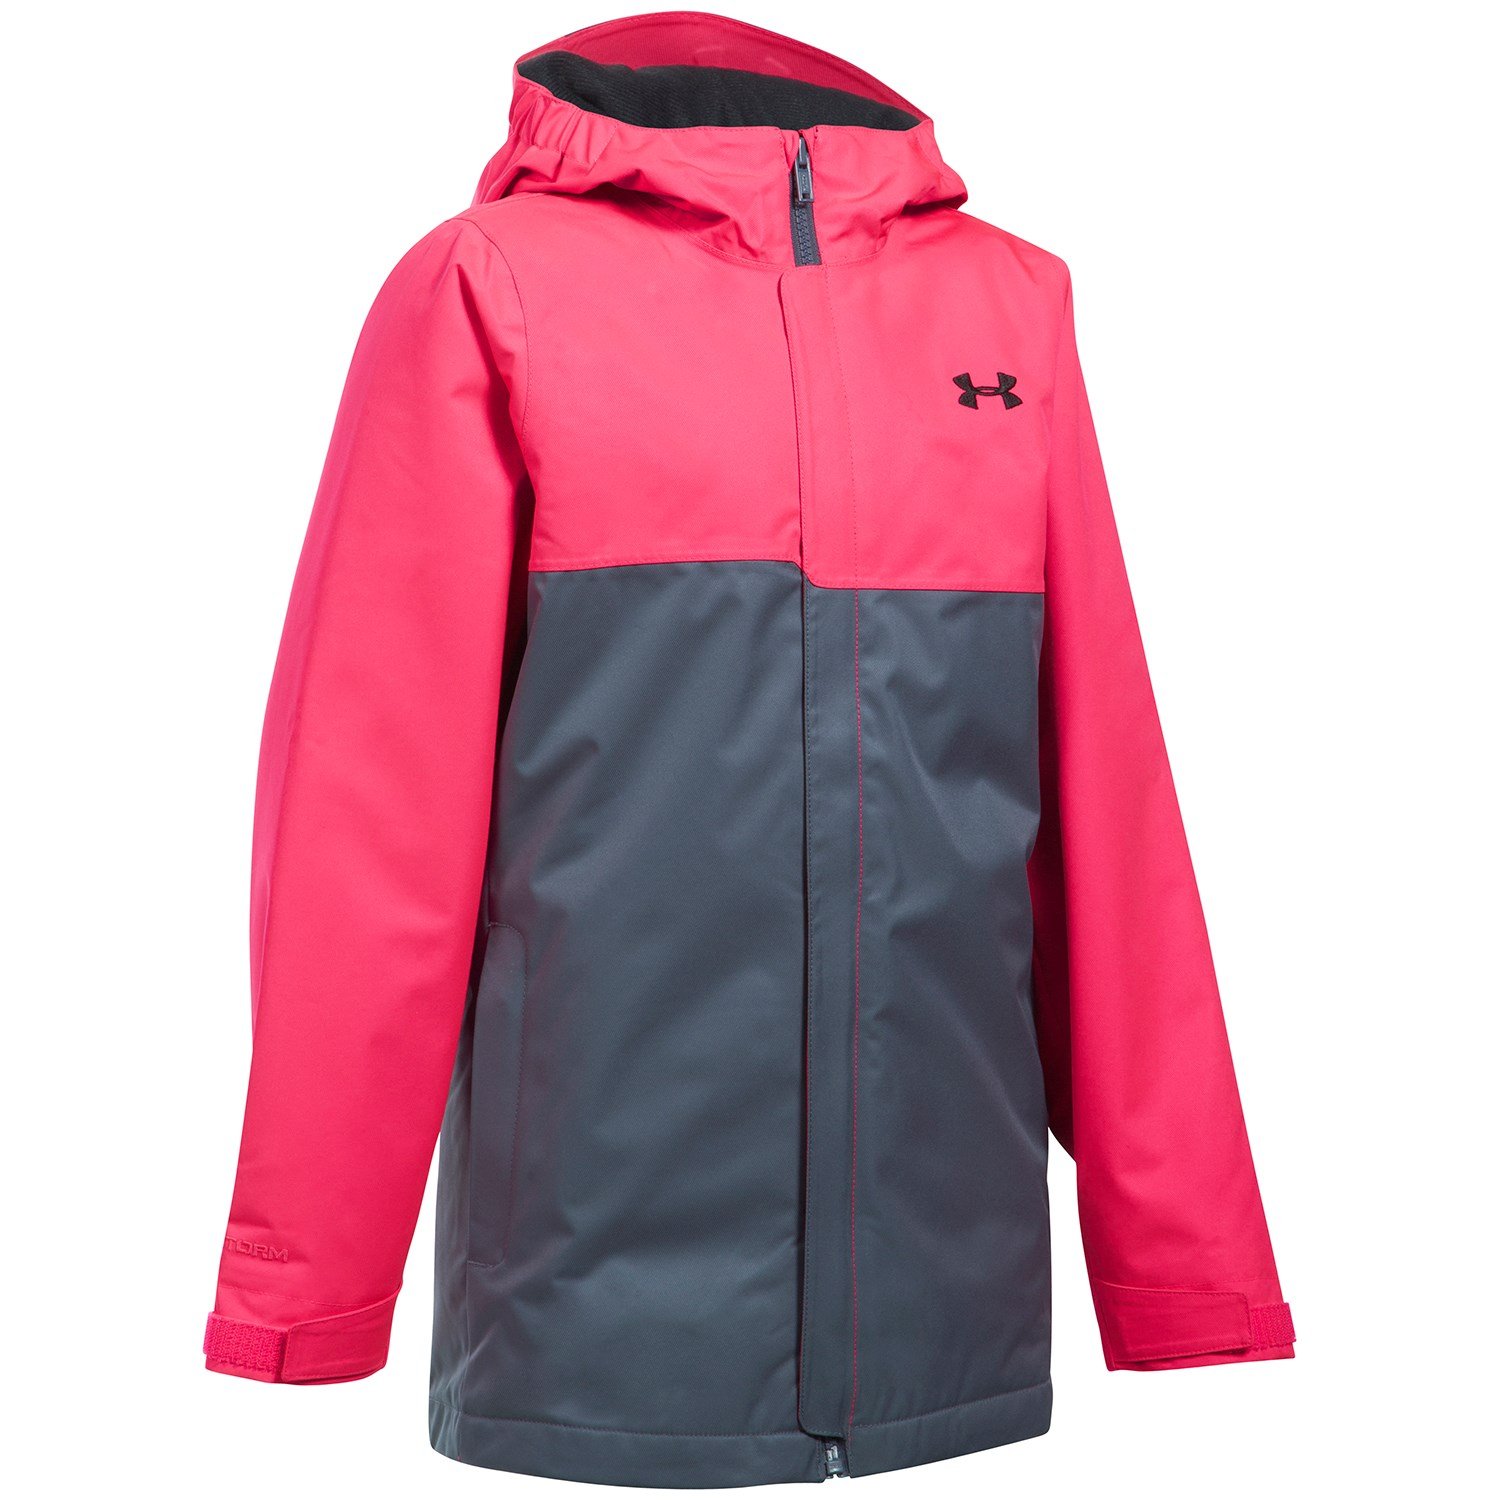 Under Armour Youth Jacket Size Chart